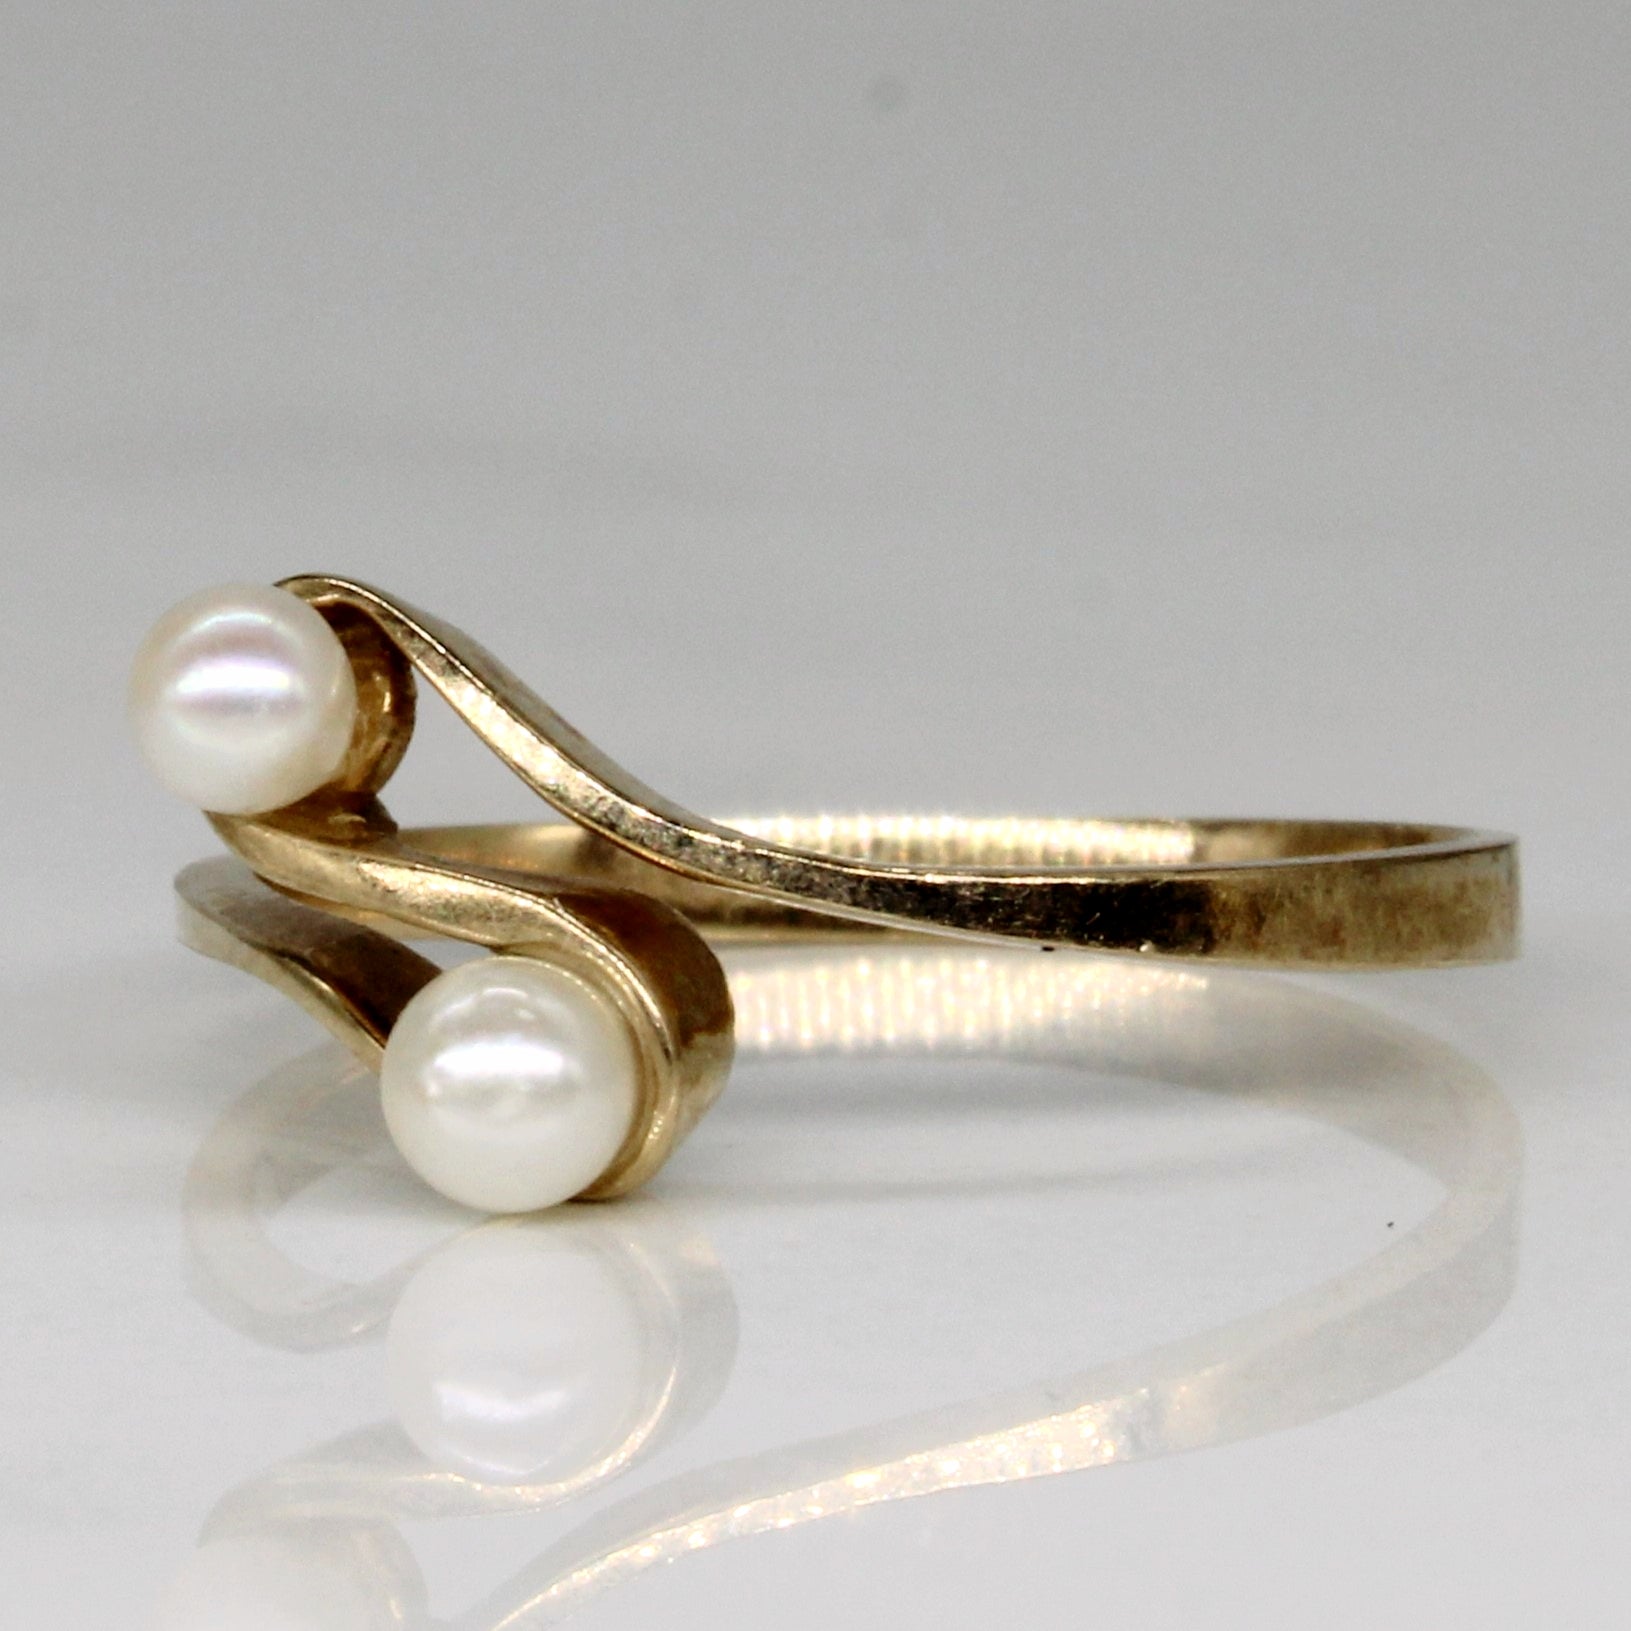 Petite Pearl Bypass Ring | SZ 6 |